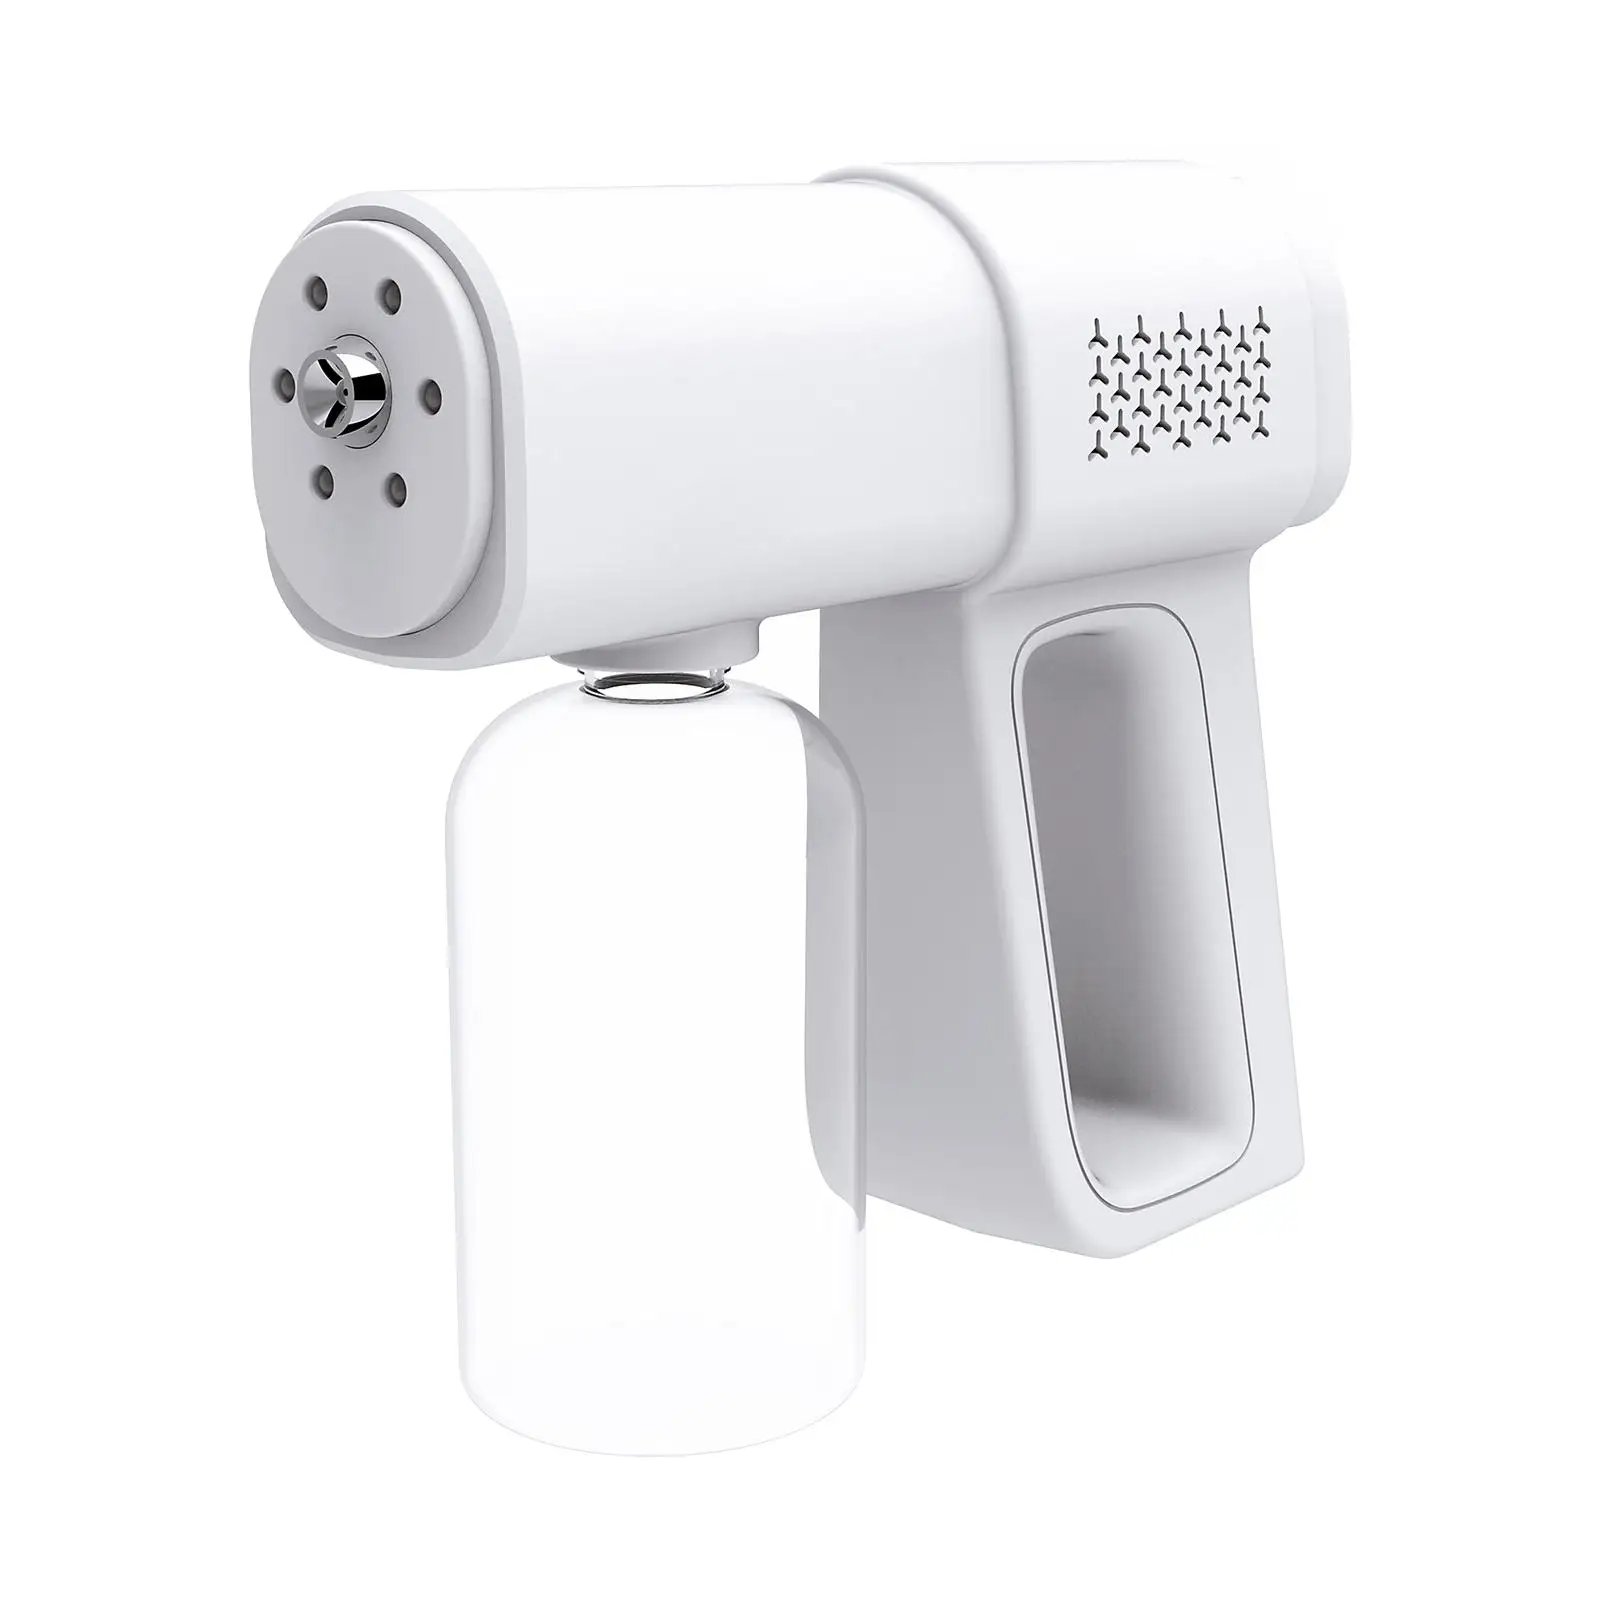 Portable Wireless Sprayer for Office Home 3200mAh